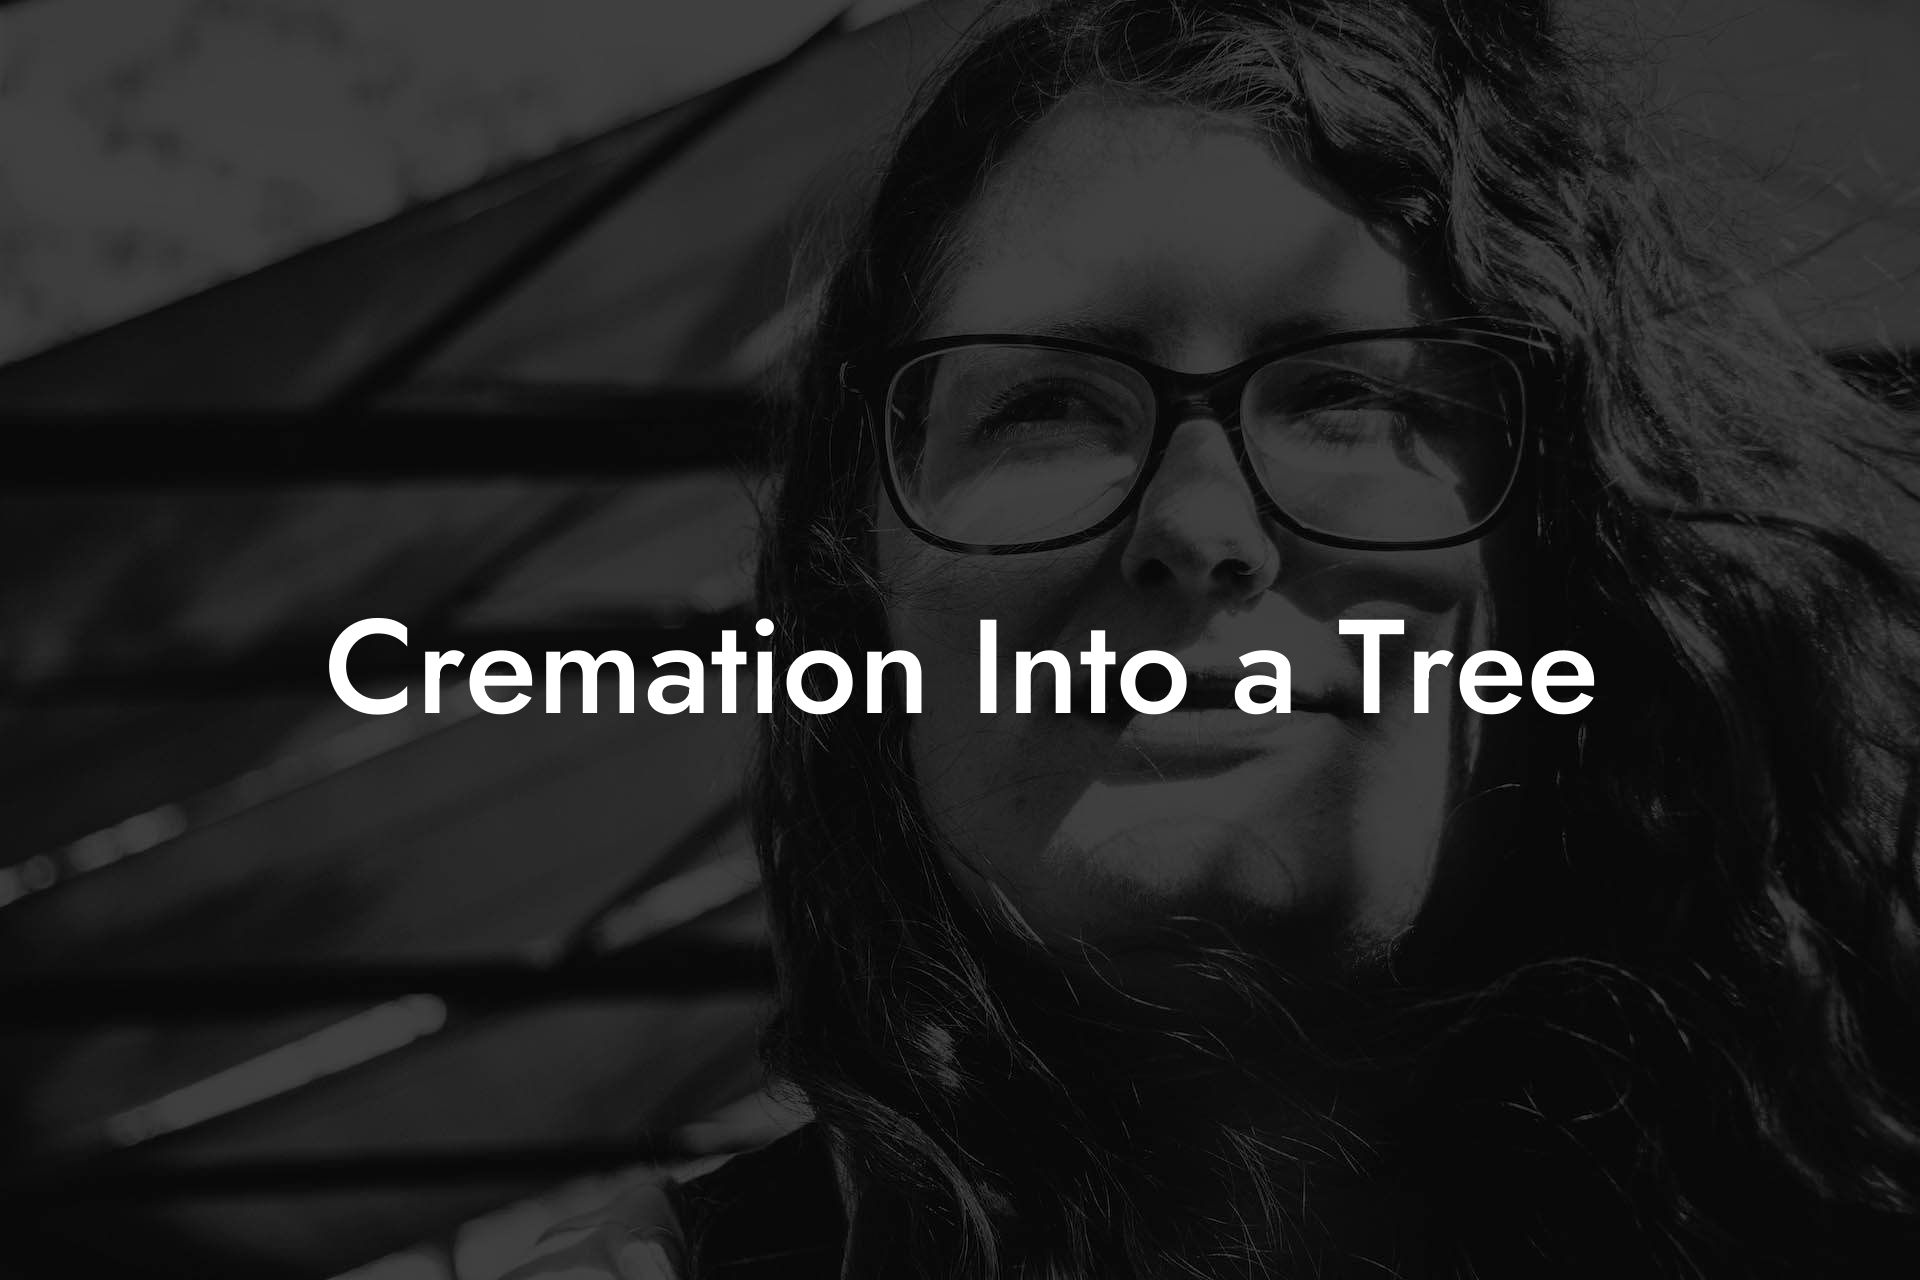 Cremation Into a Tree